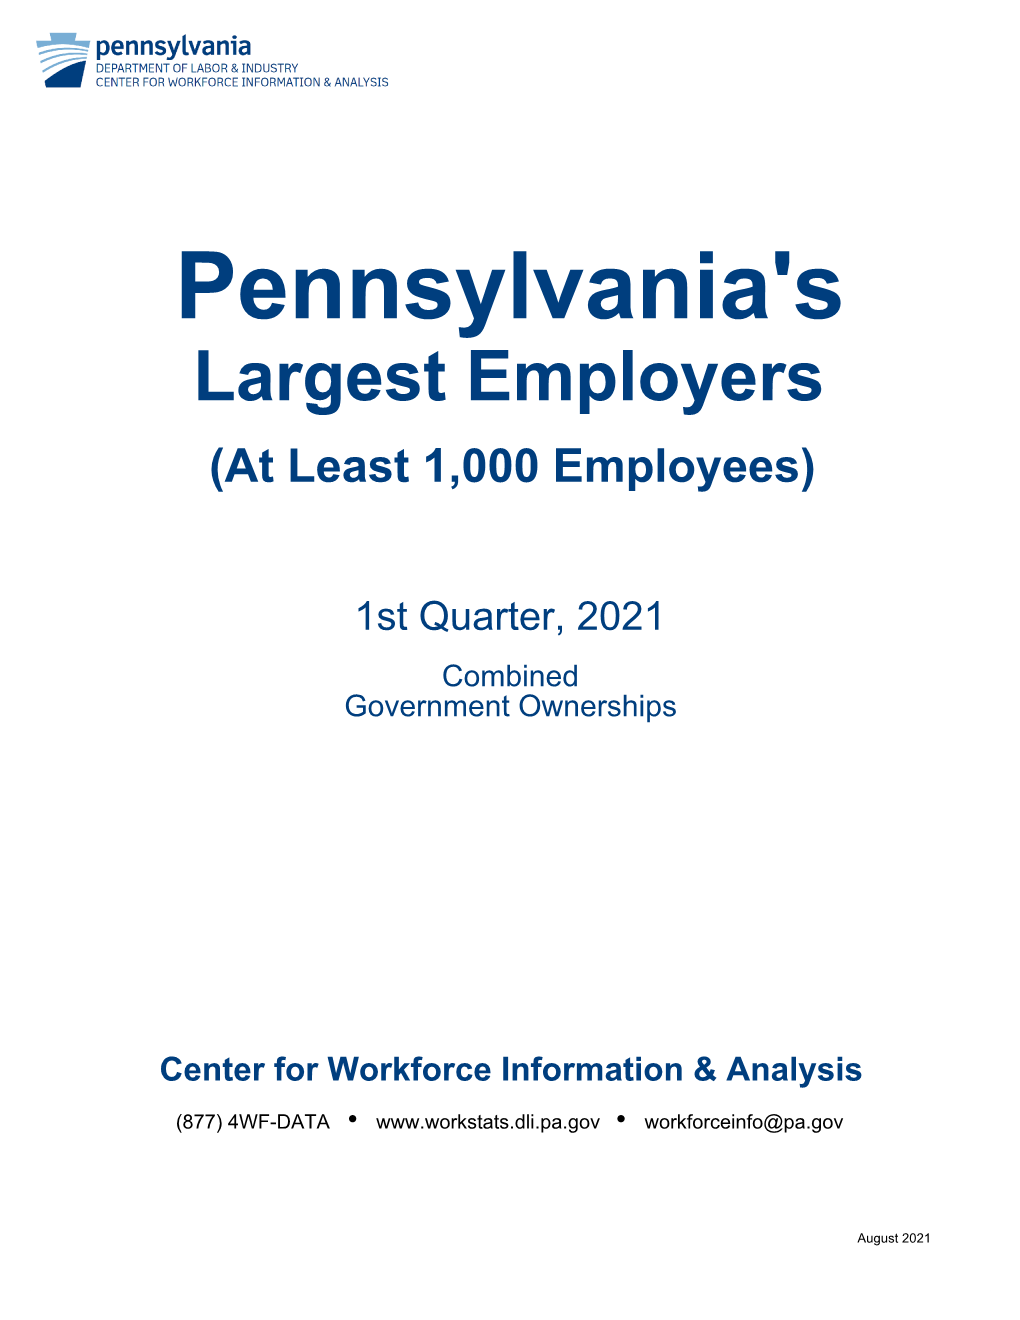 Pennsylvania's Largest Employers (At Least 1,000 Employees)